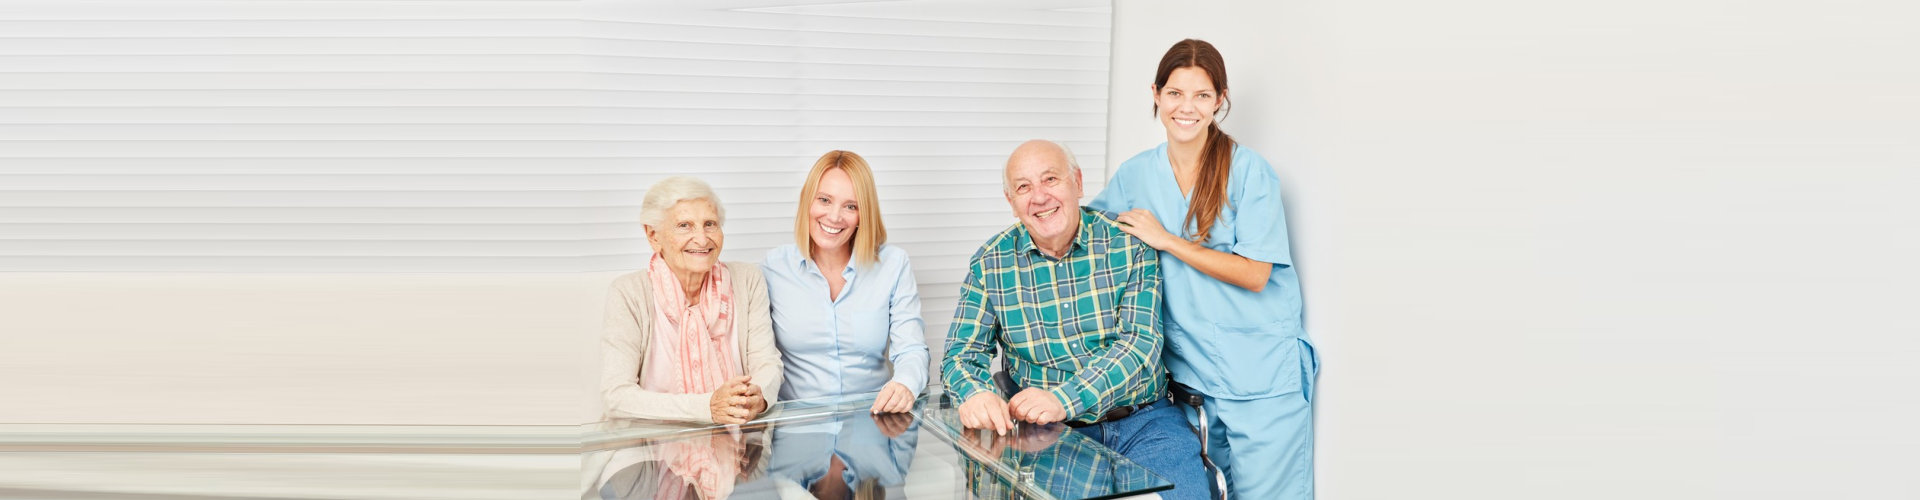 two seniors and two female caregivers